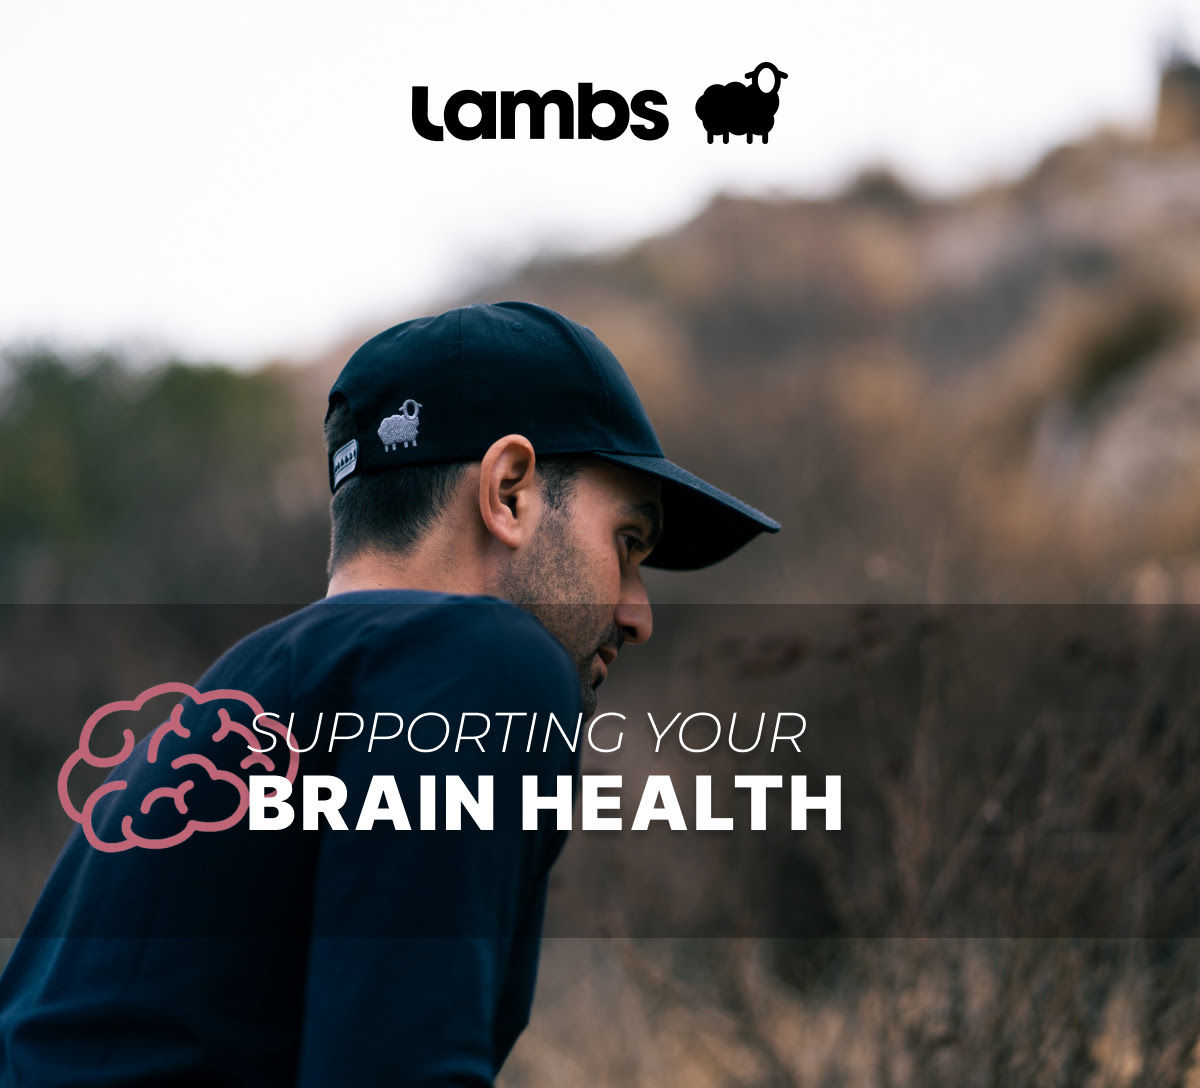 EMF protective hats – the perfect apparel for a healthy brain